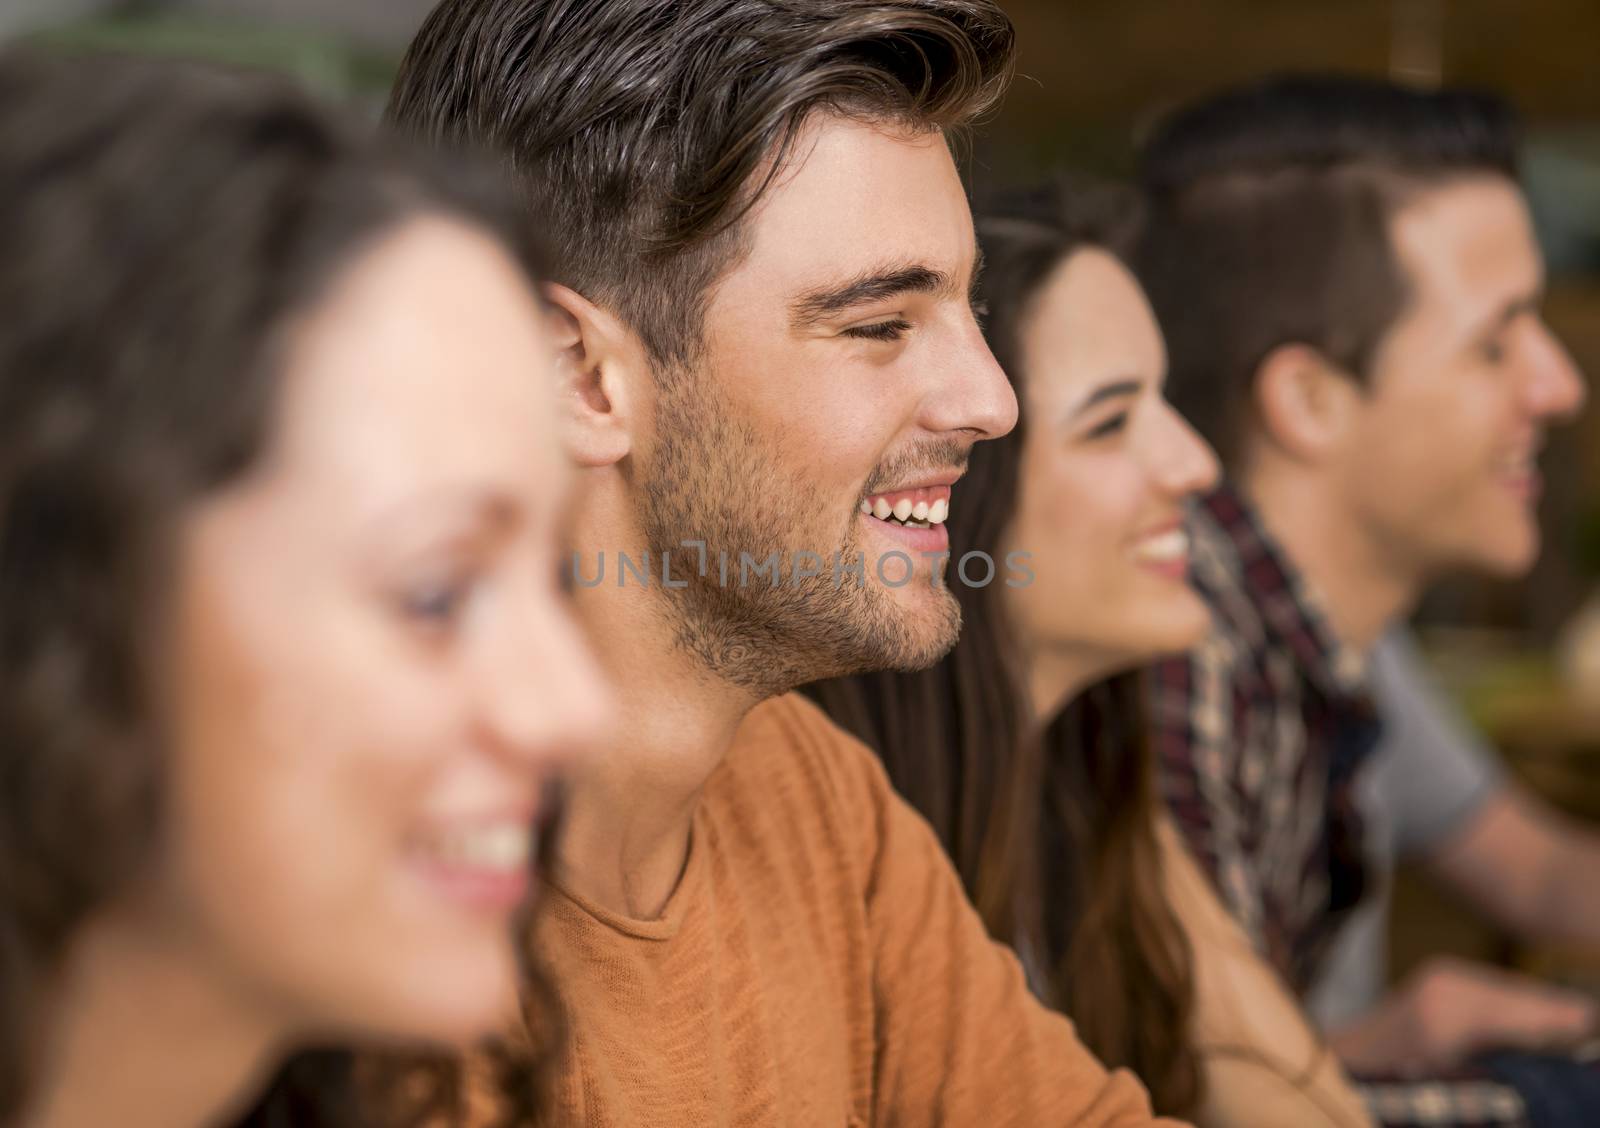 Multi-Ethnic Group of happy friends having fun at the restaurant